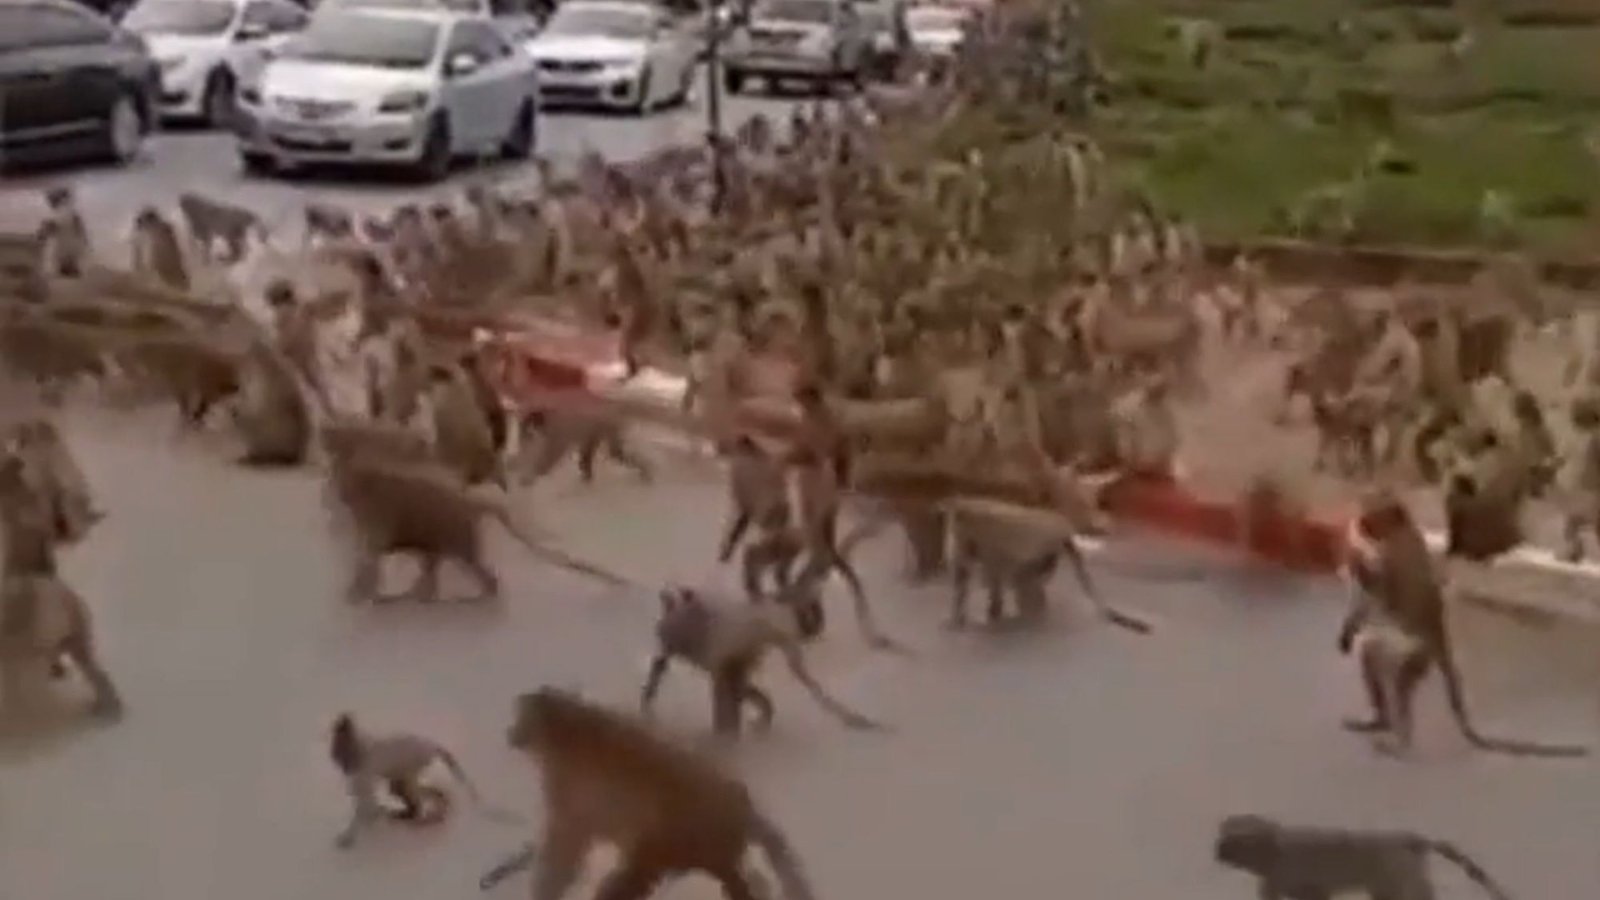 Shock vids show how terrifying MONKEY army has totally taken over city as they attack humans steal food